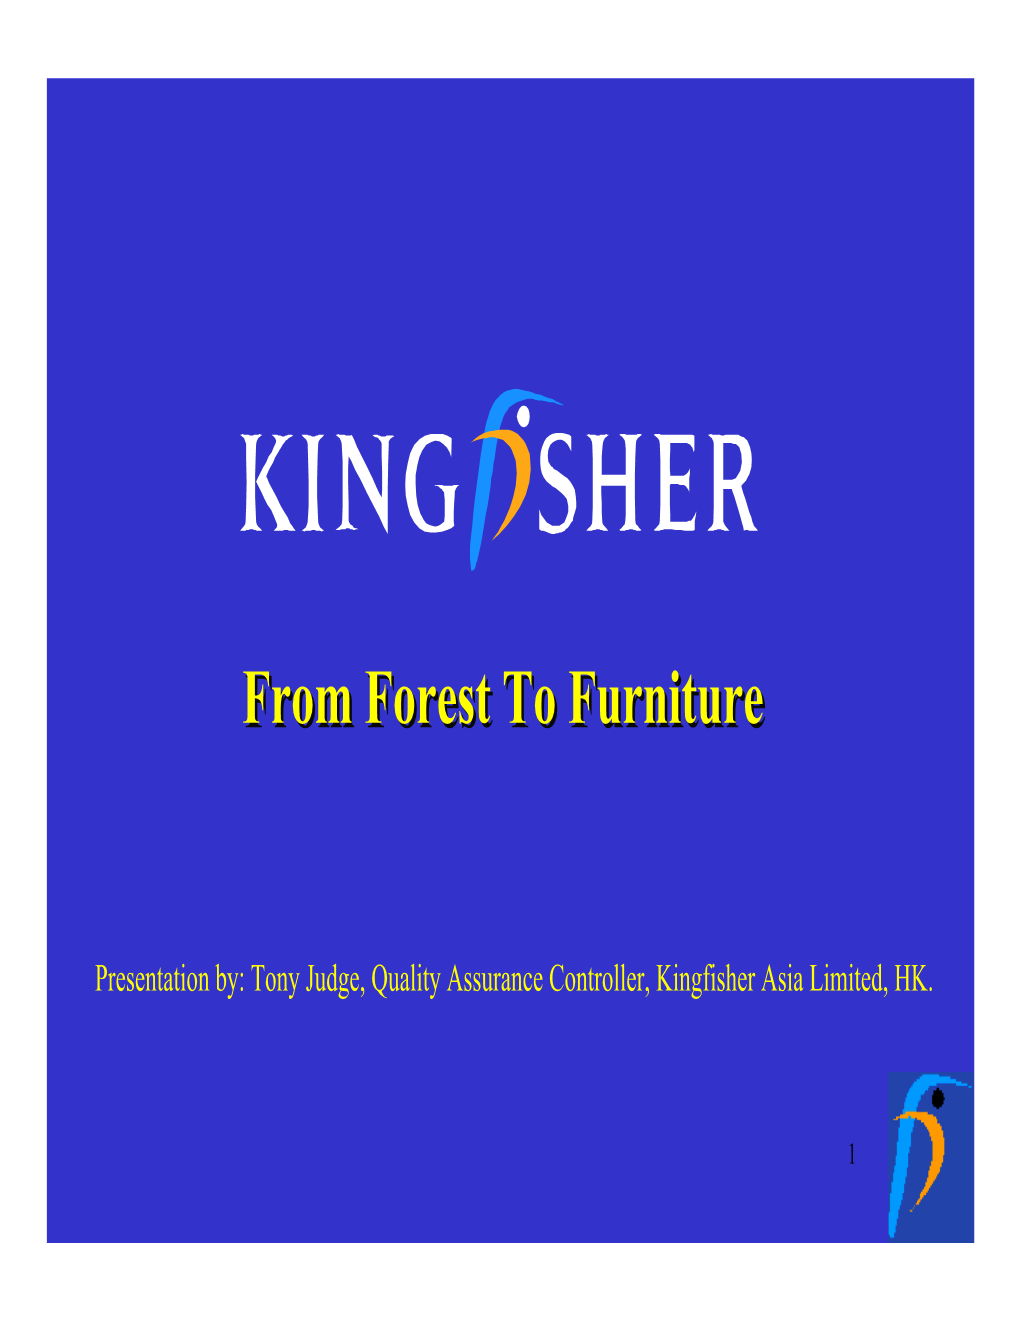 From Forest to Furniture